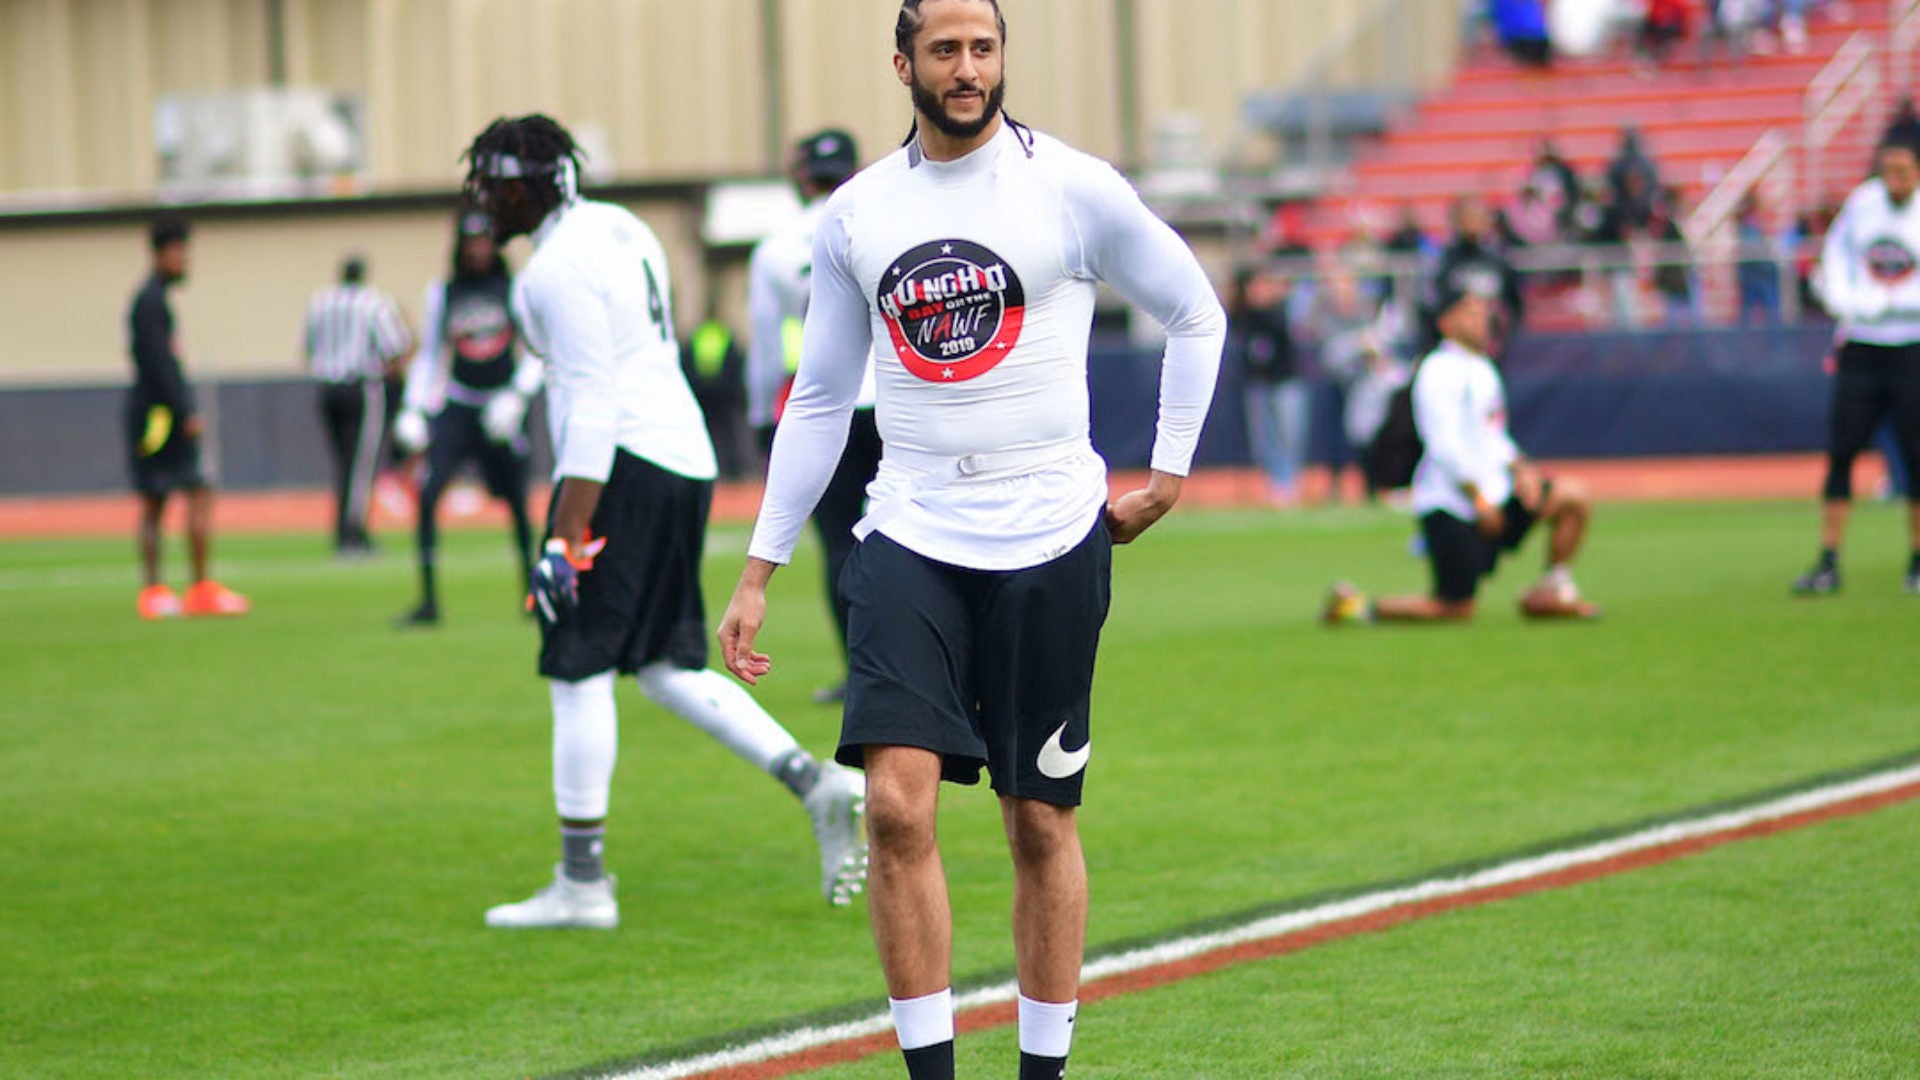 It's Been Over 850 Days Since Colin Kaepernick Played In The NFL, But He's Never Stopped Training For His Return